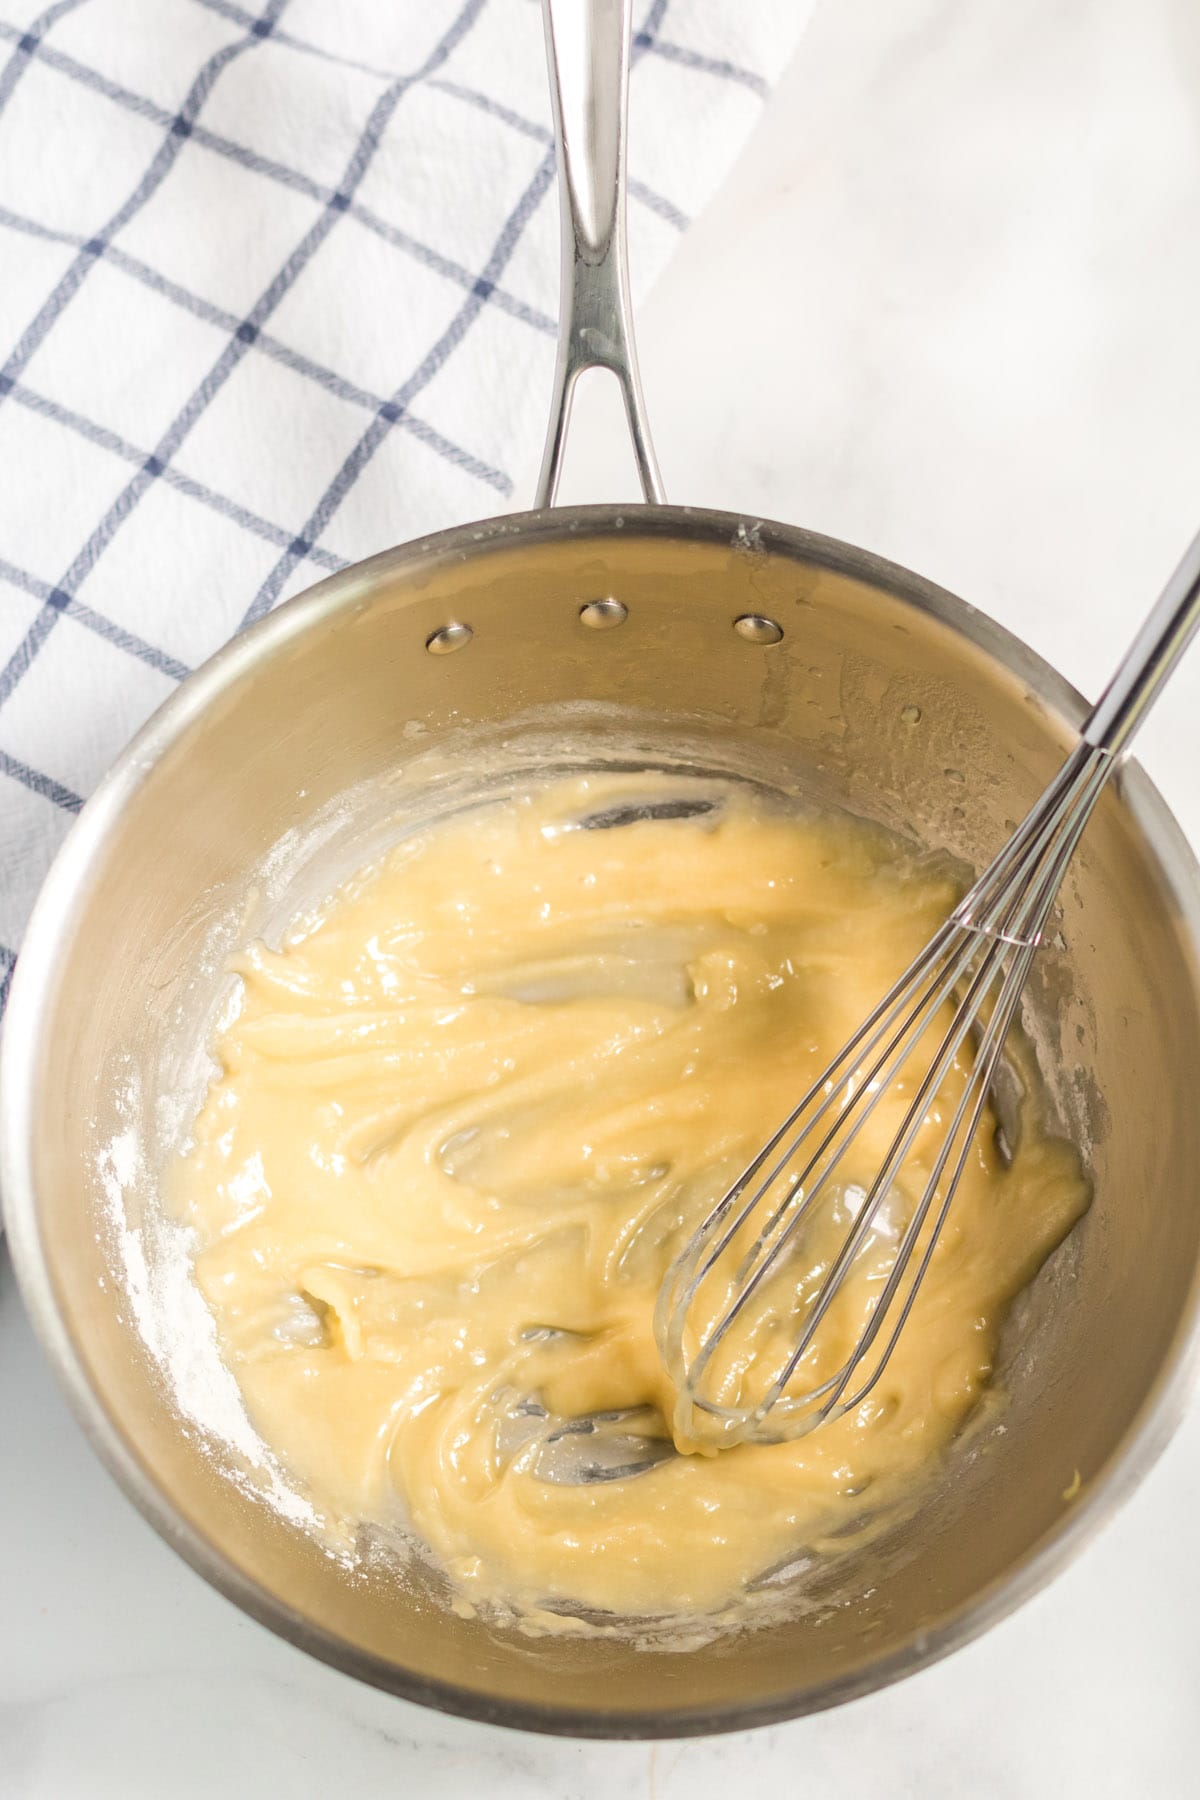 Melt butter, whisk in flour and stir occasionally